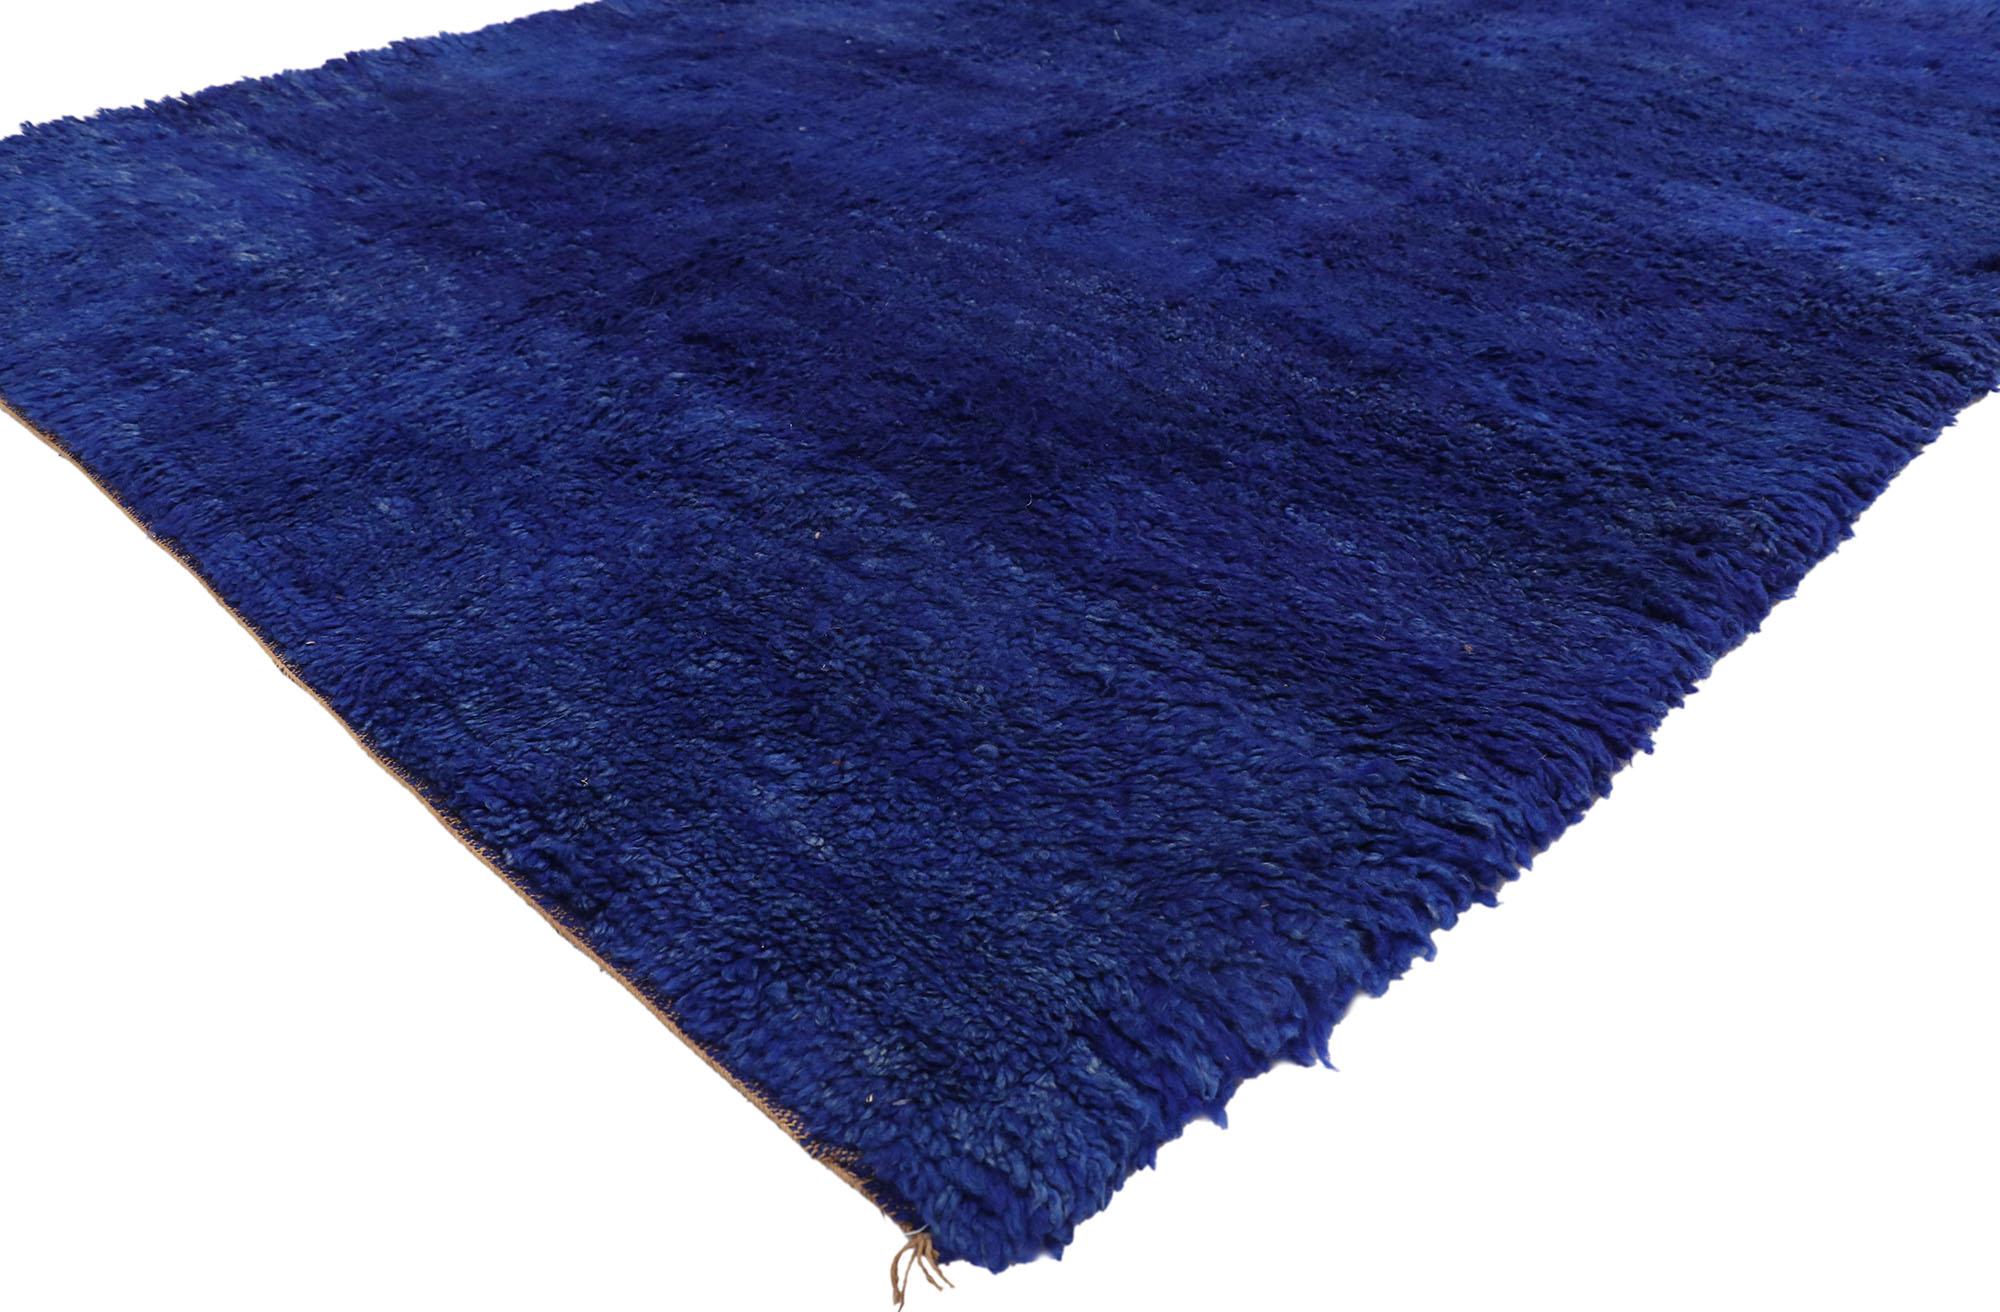 20935 Vintage Blue Beni Mrirt Moroccan Rug, 06'01 x 09'03. 
Cozy nomad meets mesmerizing Marjorelle Blue in this hand knotted wool vintage Beni Mrirt Moroccan rug. Get ready to be transported to a peaceful and captivating place with this vintage